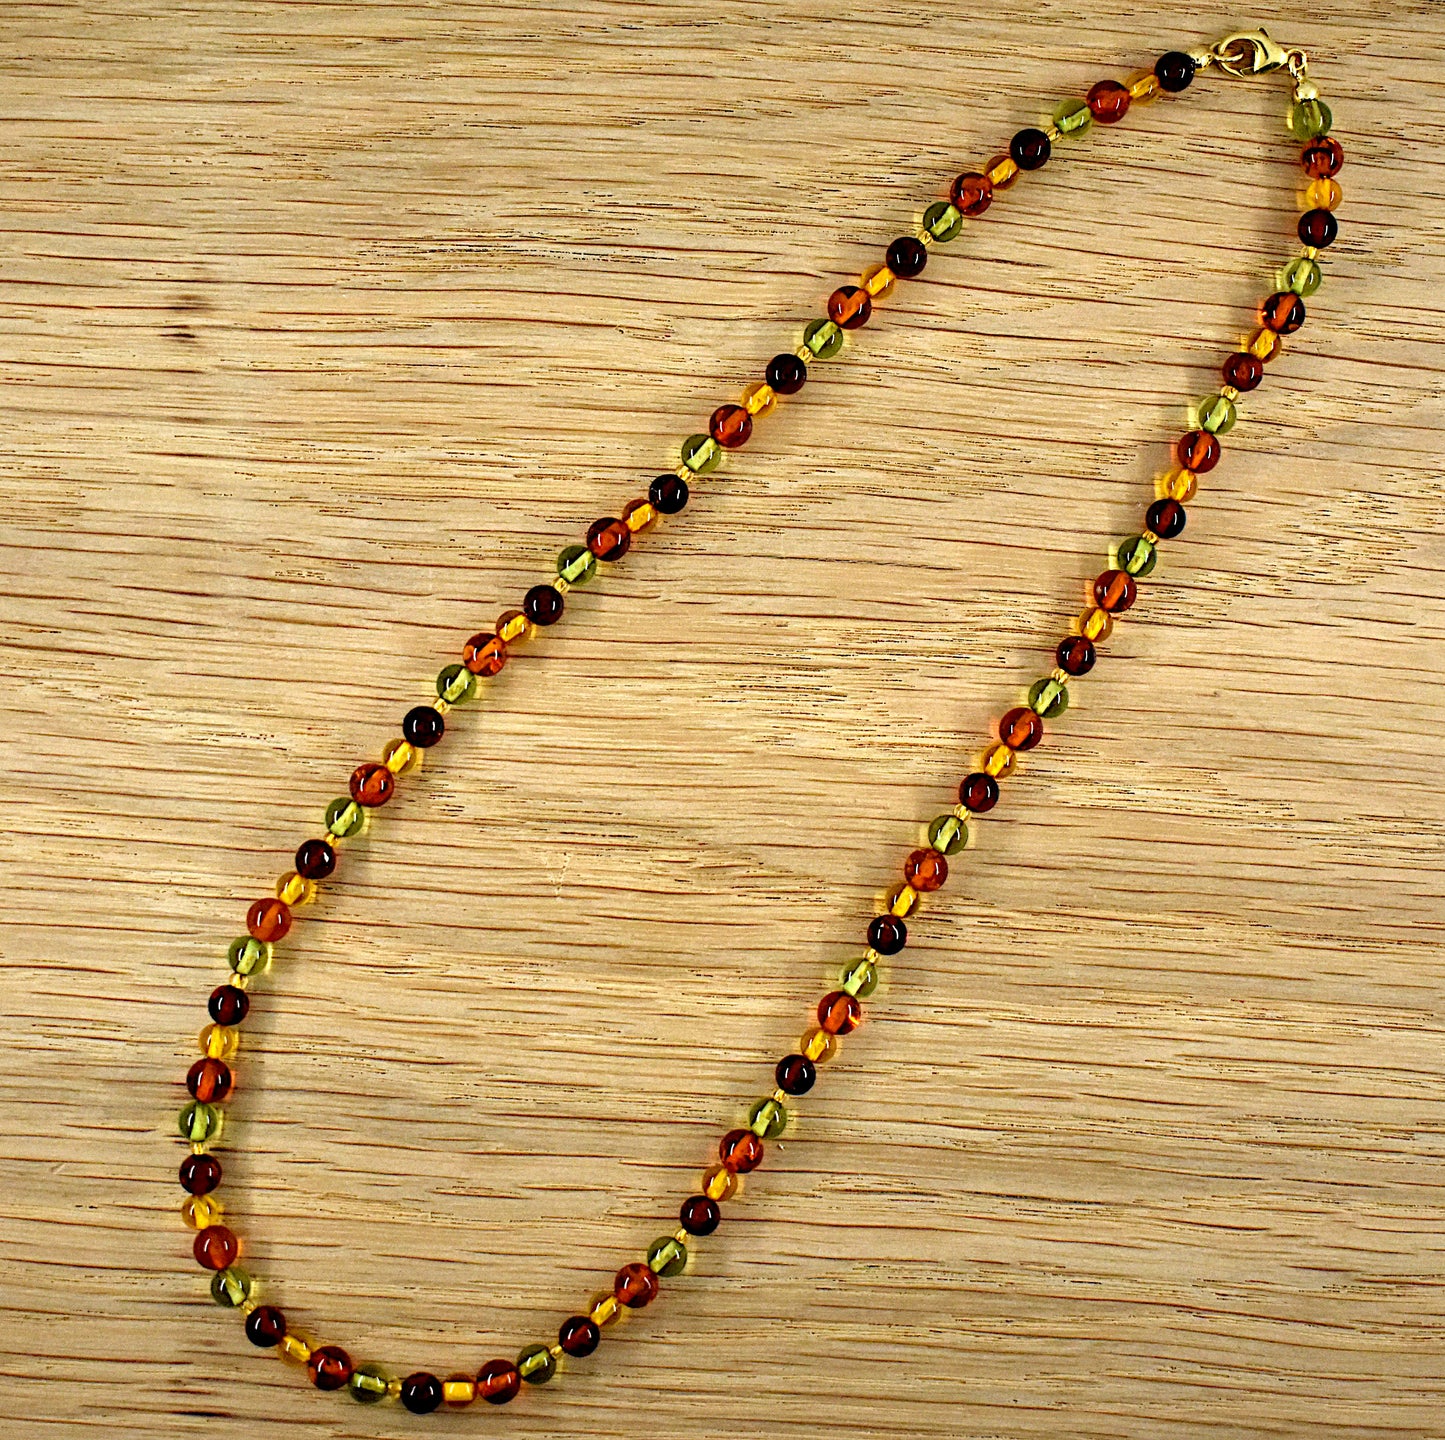 Caribbean amber necklace